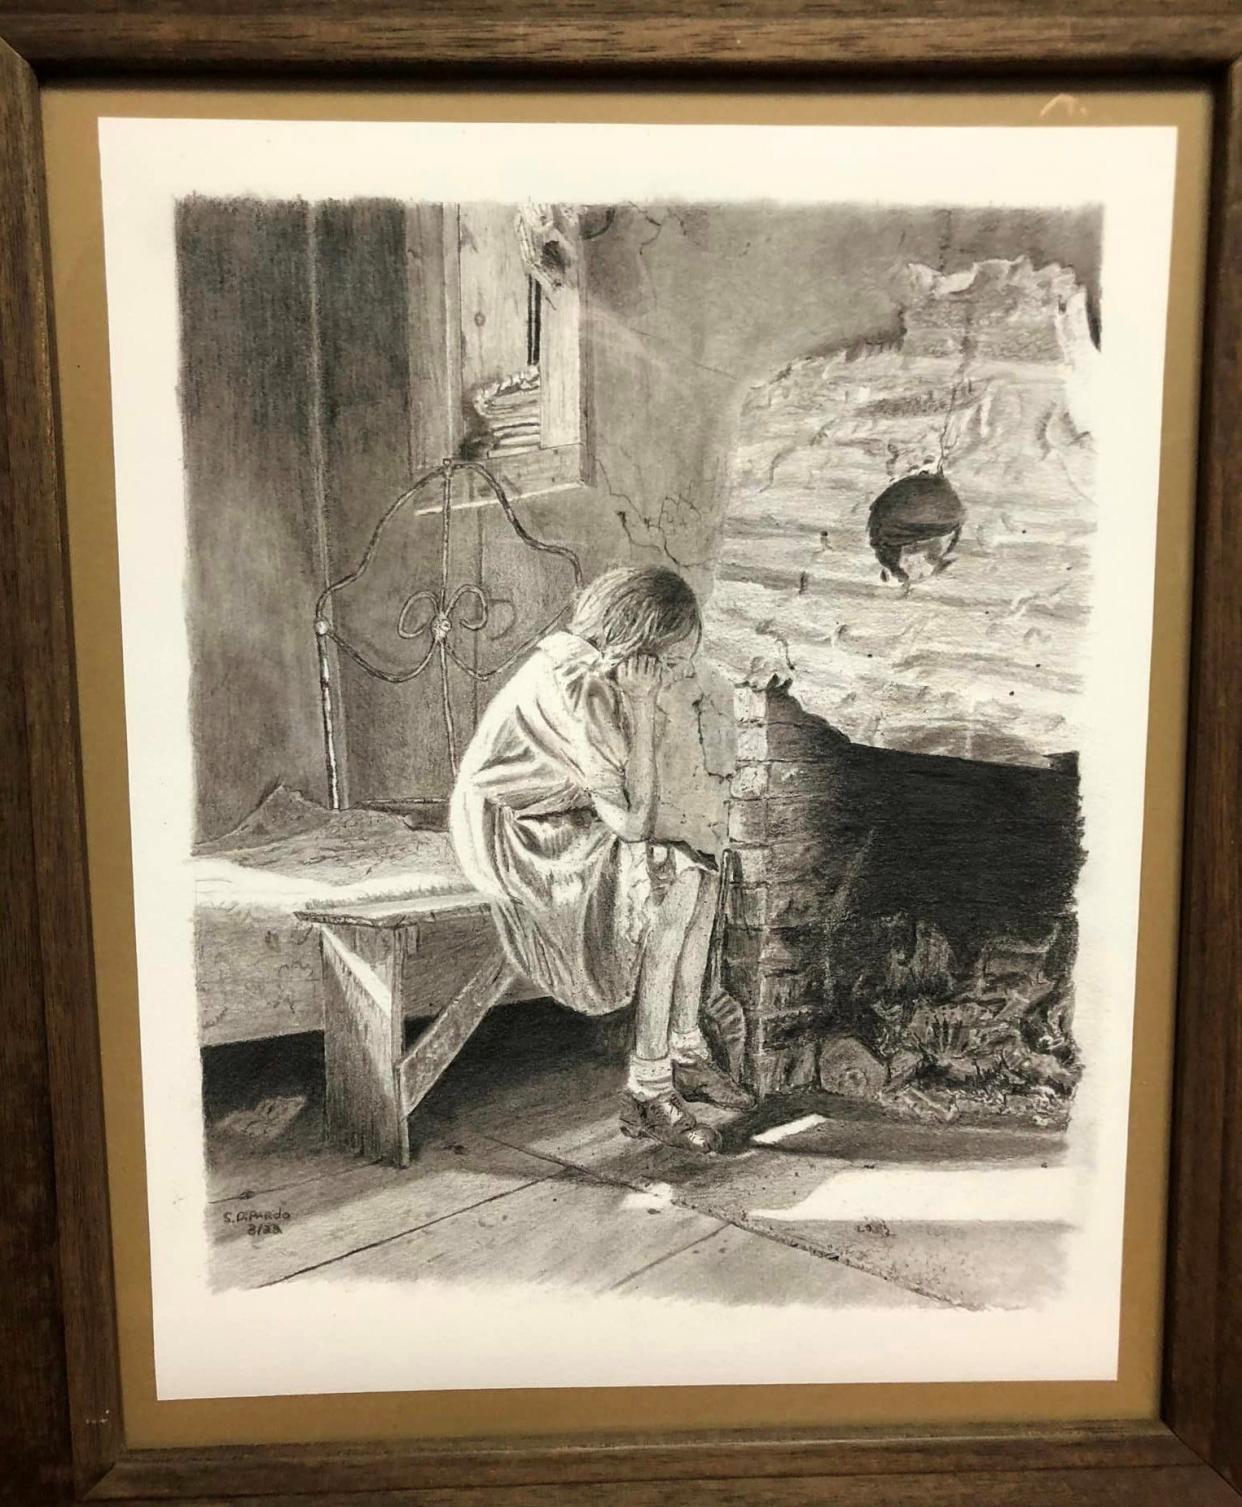 A pencil and ink drawing “Color of Loneliness The Depression” by the late Joseph "Scott" DiPardo on display at Side Street Gallery in Colonial Heights.